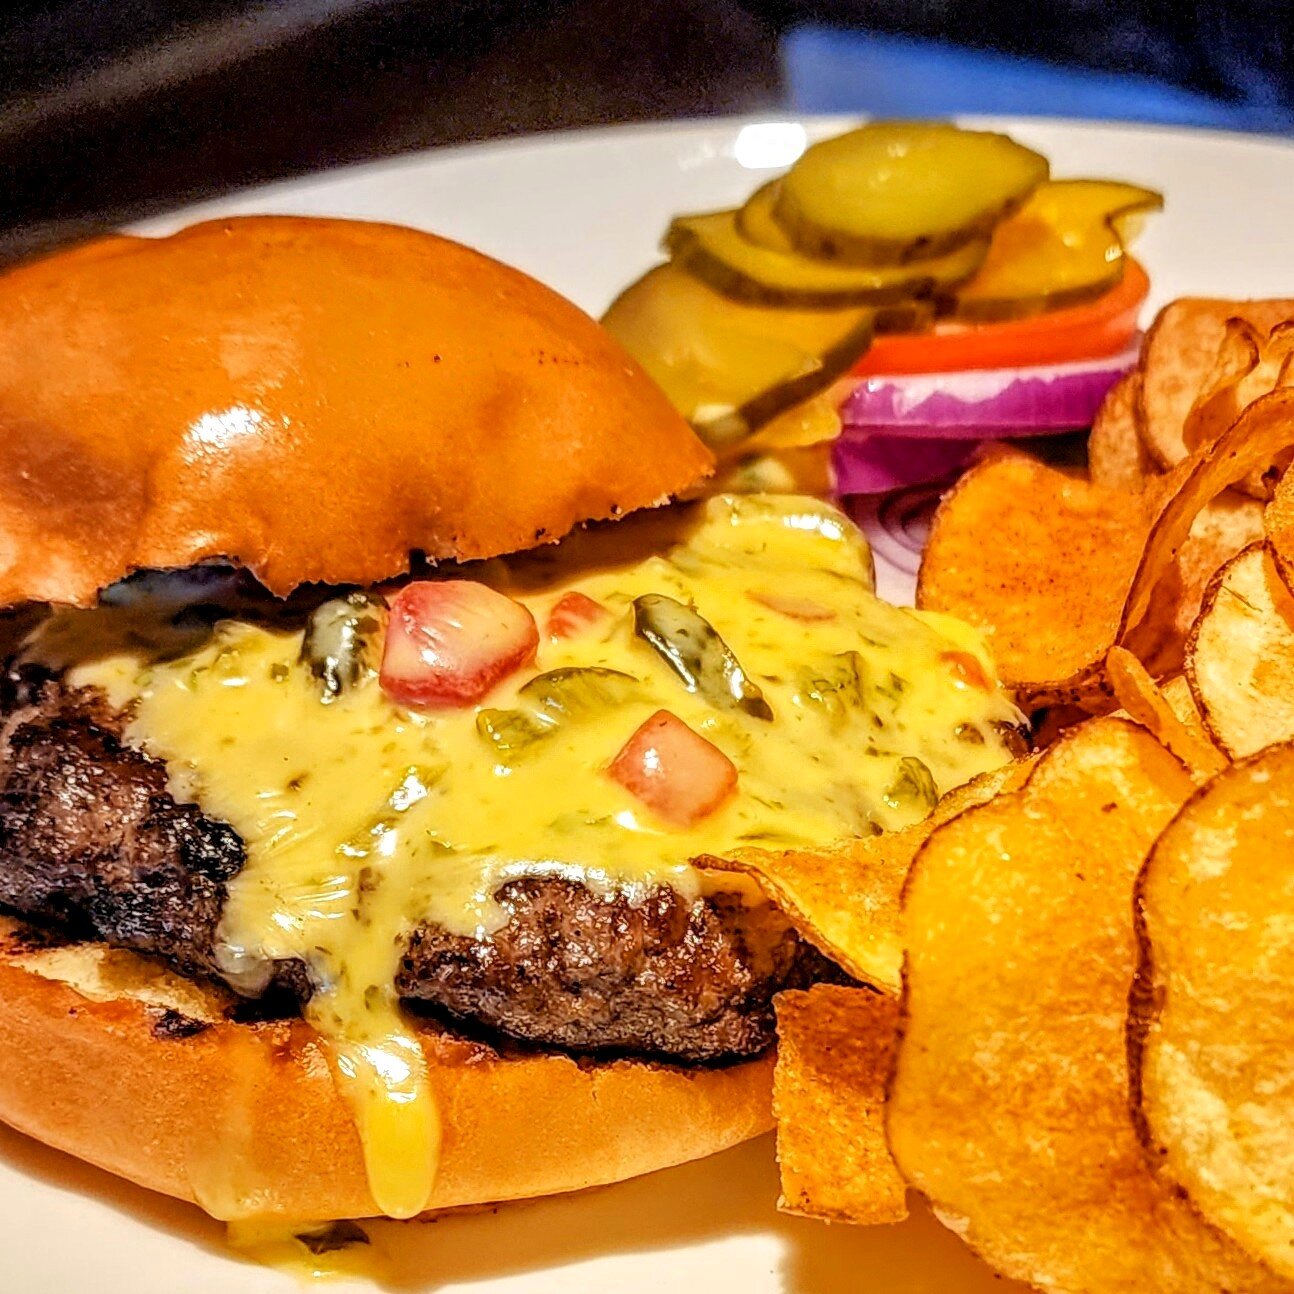 Everyone loves chili con queso! So this Friday's #wildgame burger features Chef's magic cheese sauce. #BurgerFriday just got a whole lot tastier! rainbow-lodge.com